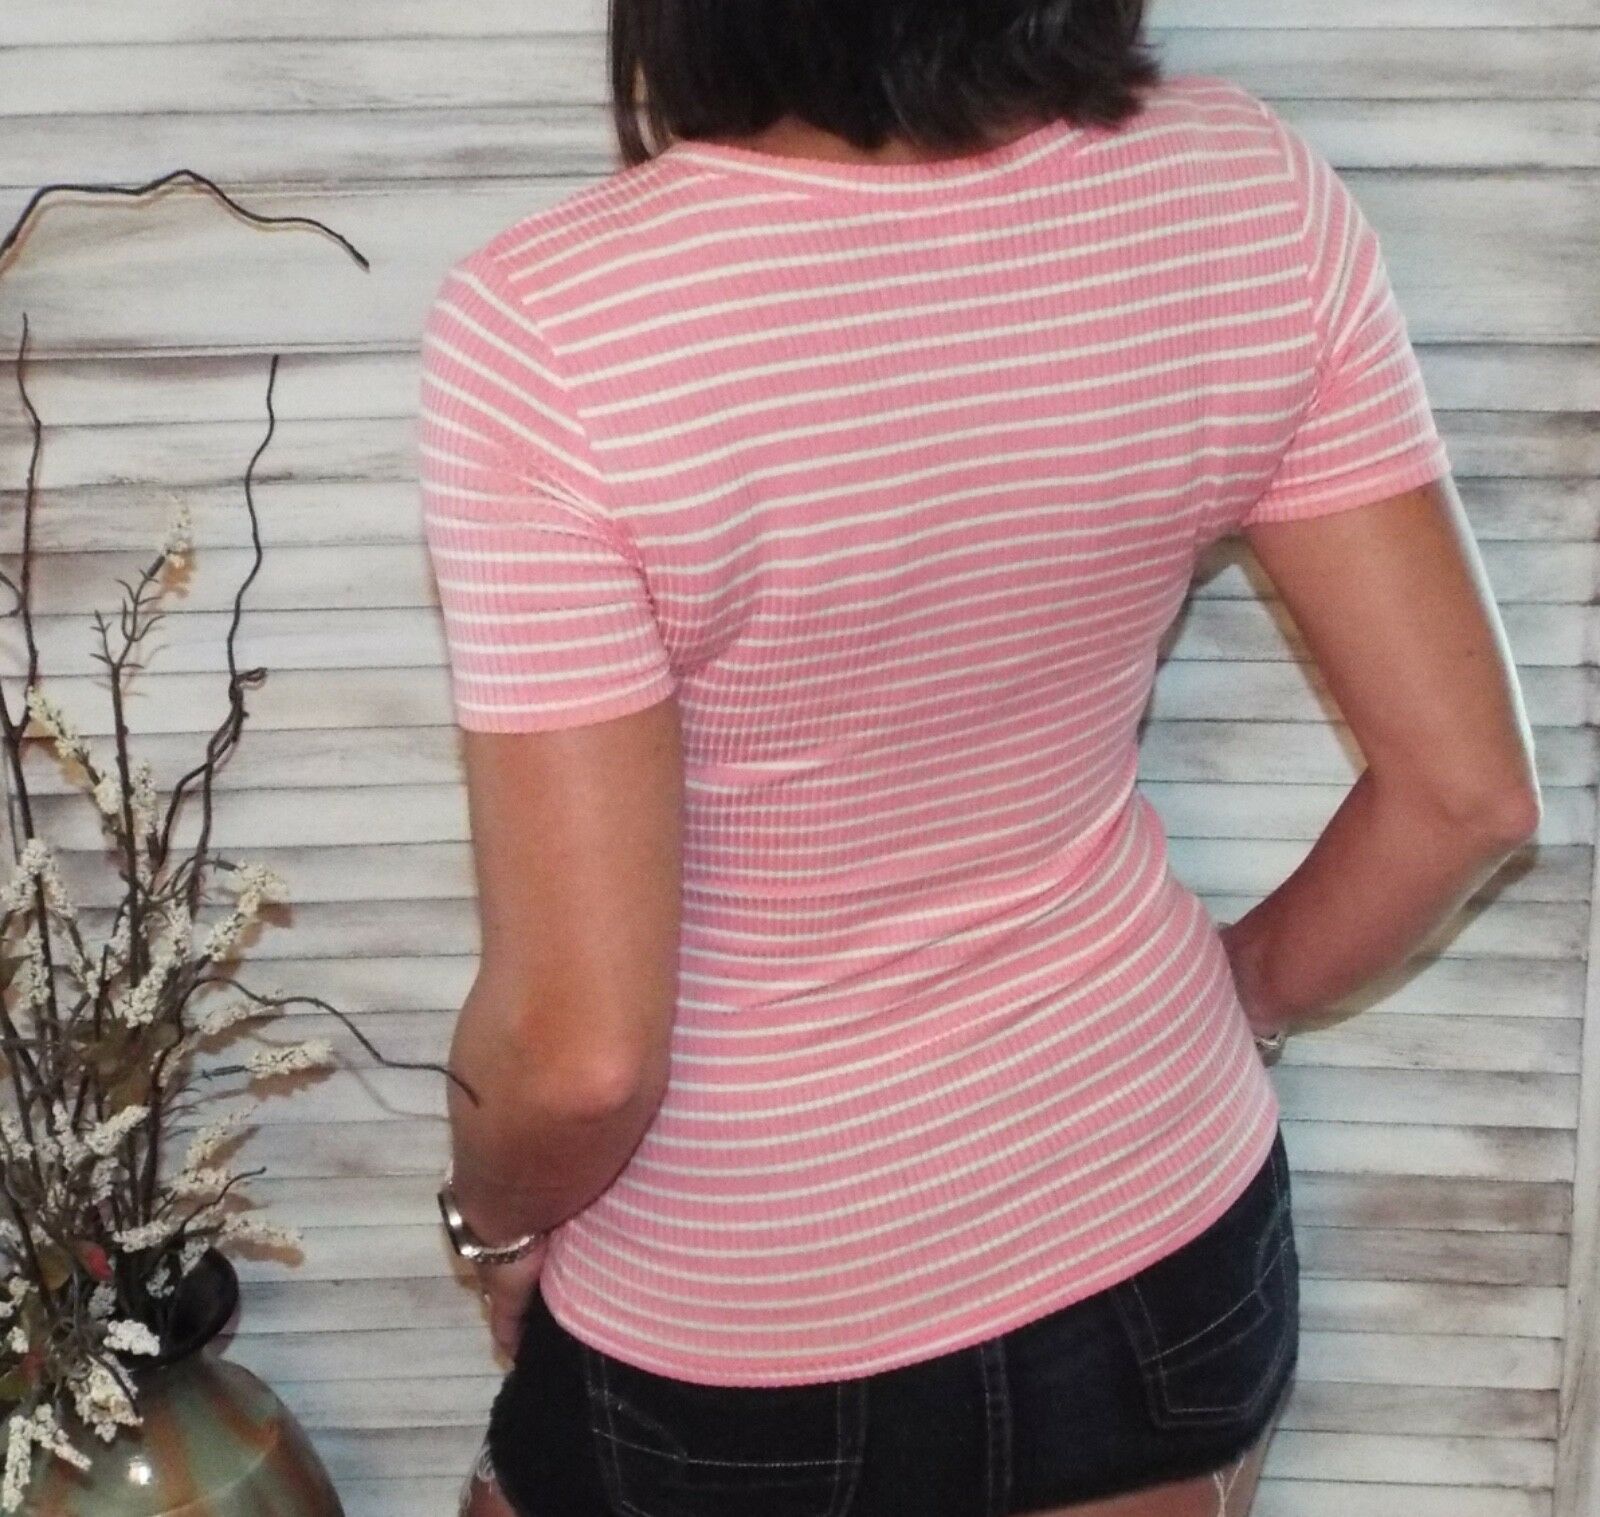 Very Sexy Scoop Preppy Striped Rugby Stretch Baby Tee Shirt Pink White S/M/L